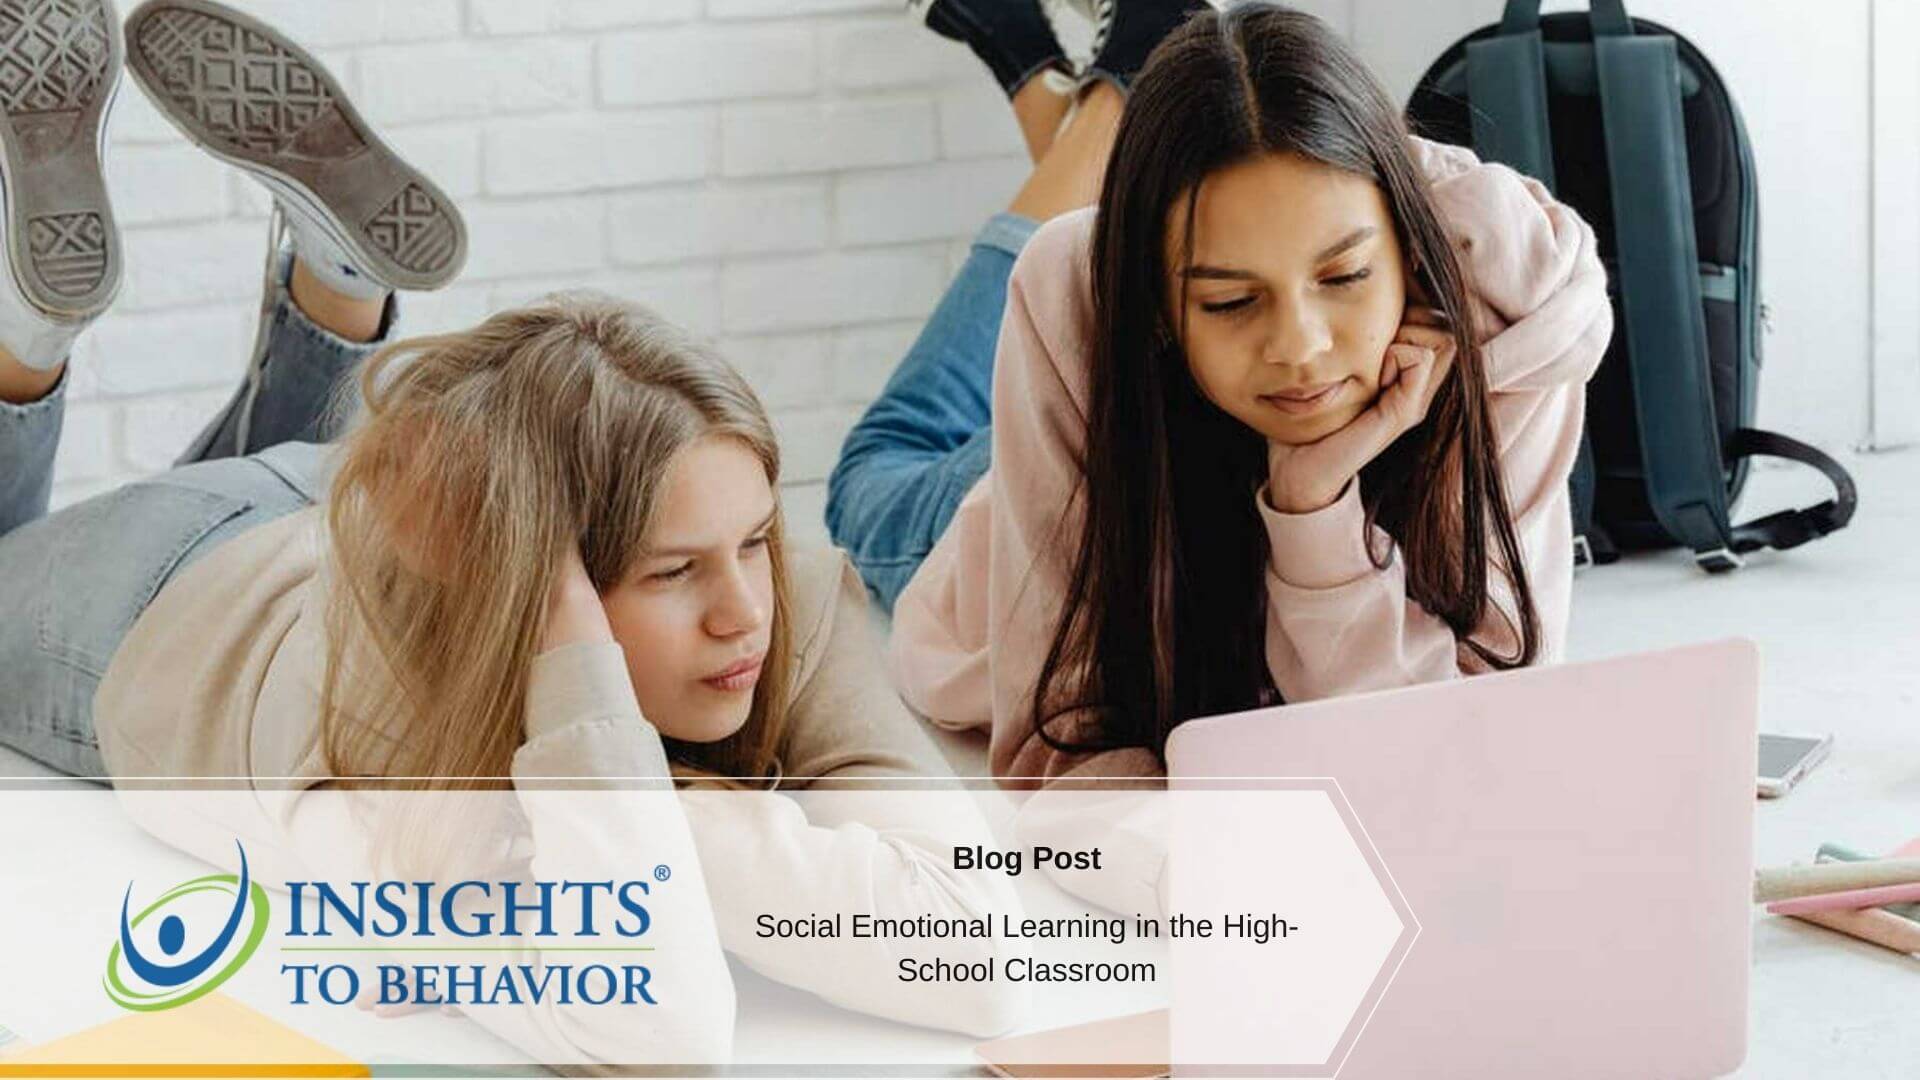 Insights to behavior blog post image template